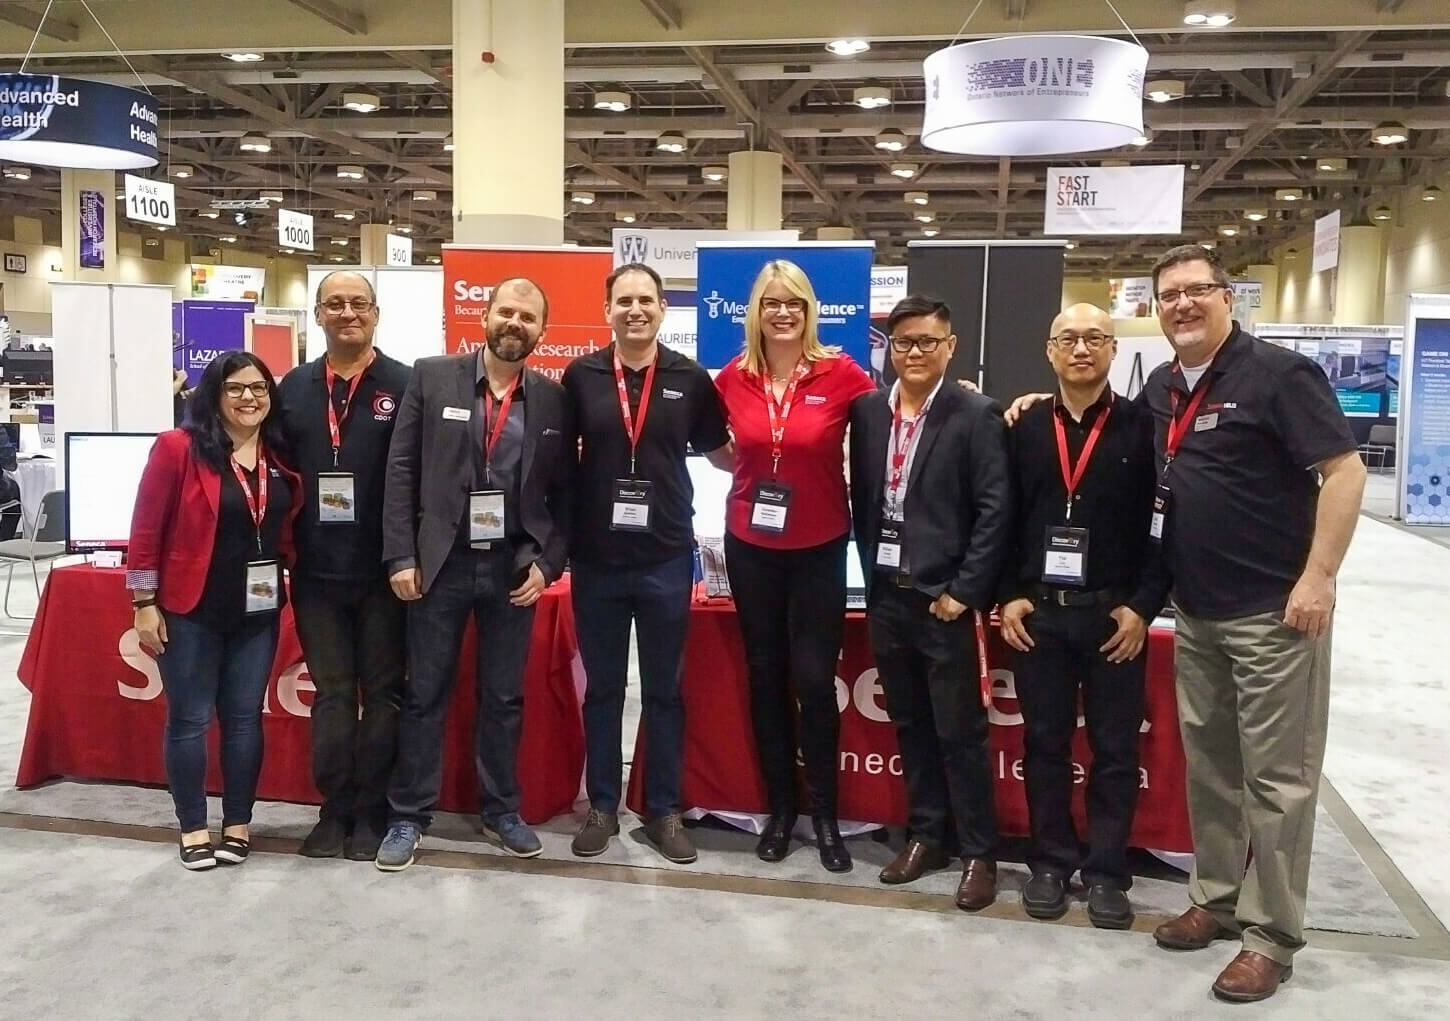 Seneca's Applied Research Team at an industry event